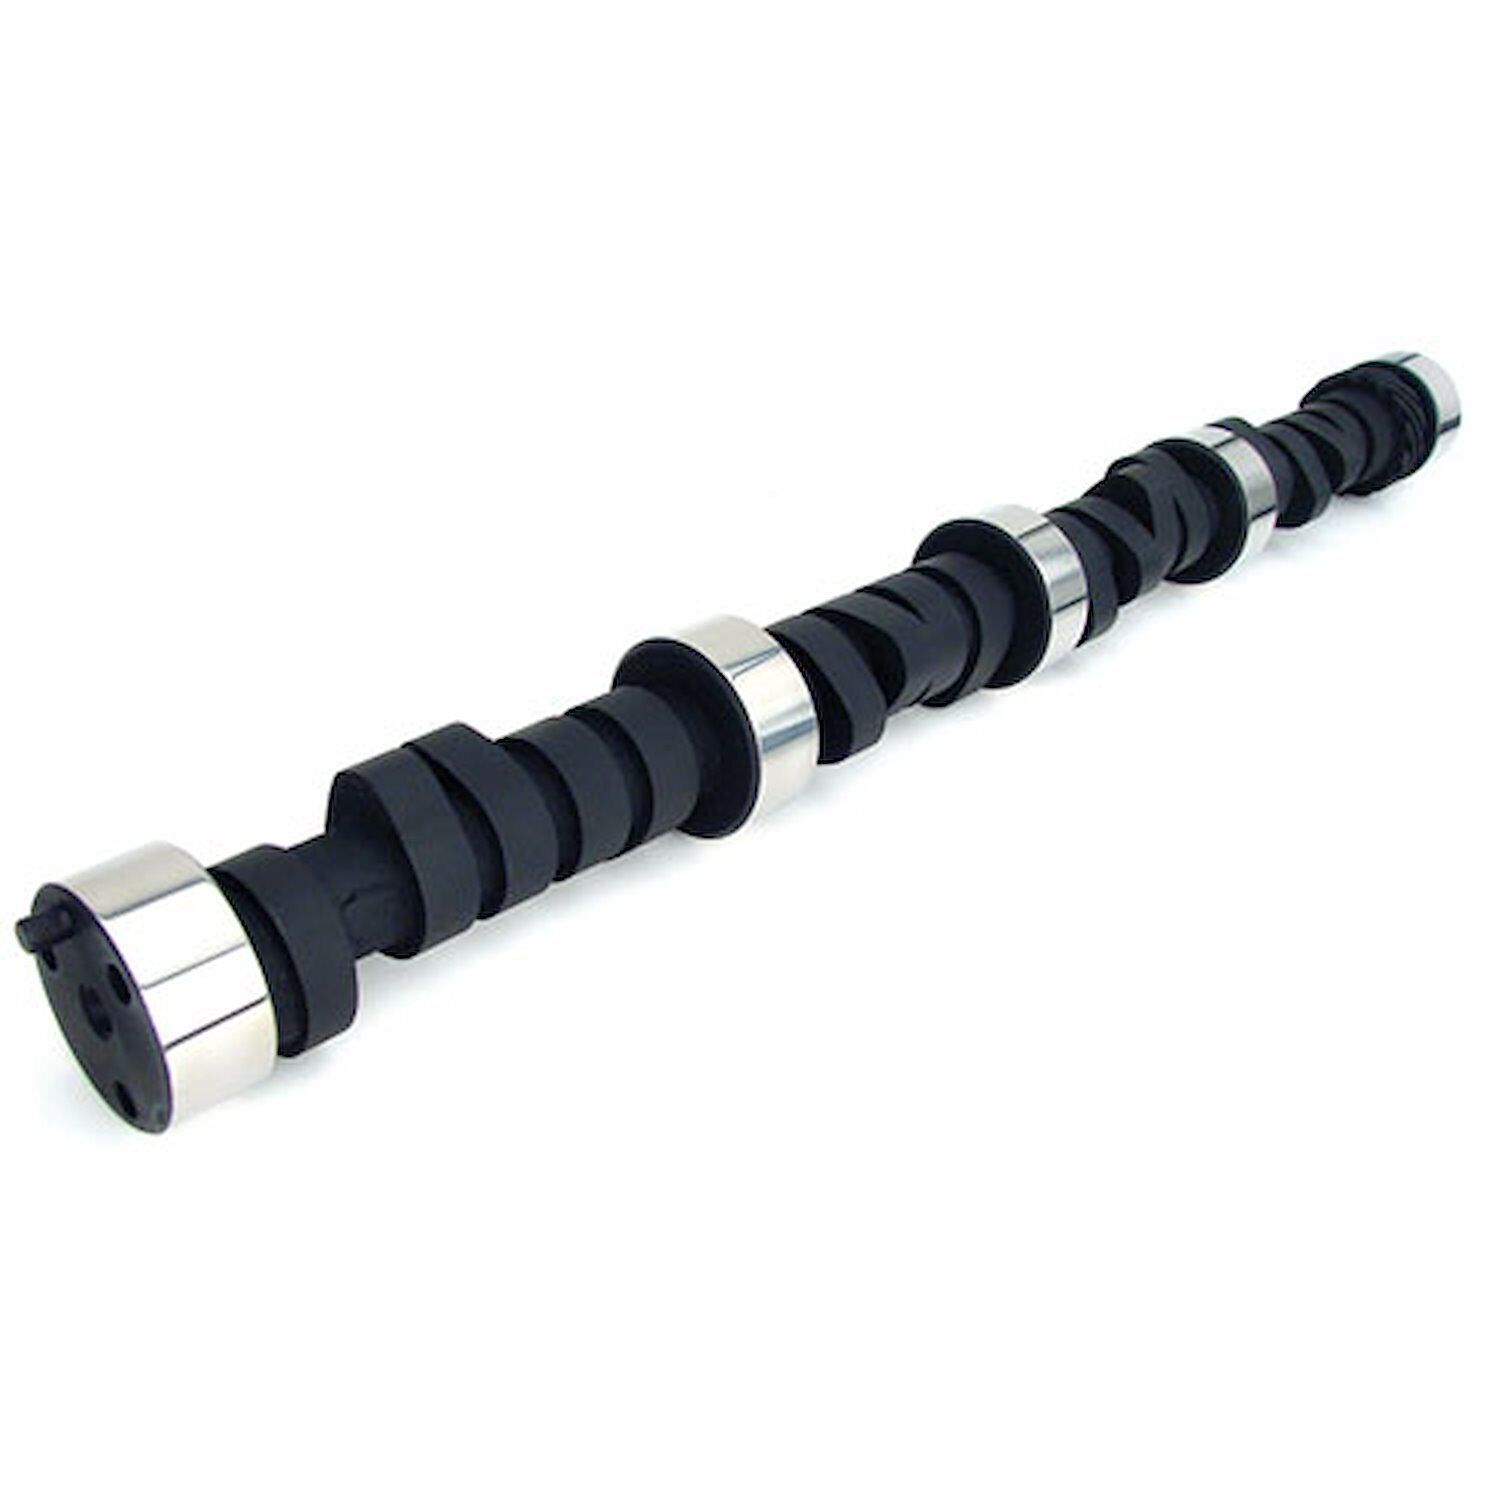 COMP Cams 11-250-3 Xtreme Energy 284H Hydraulic Flat Tappet Camshaft Only Lift: